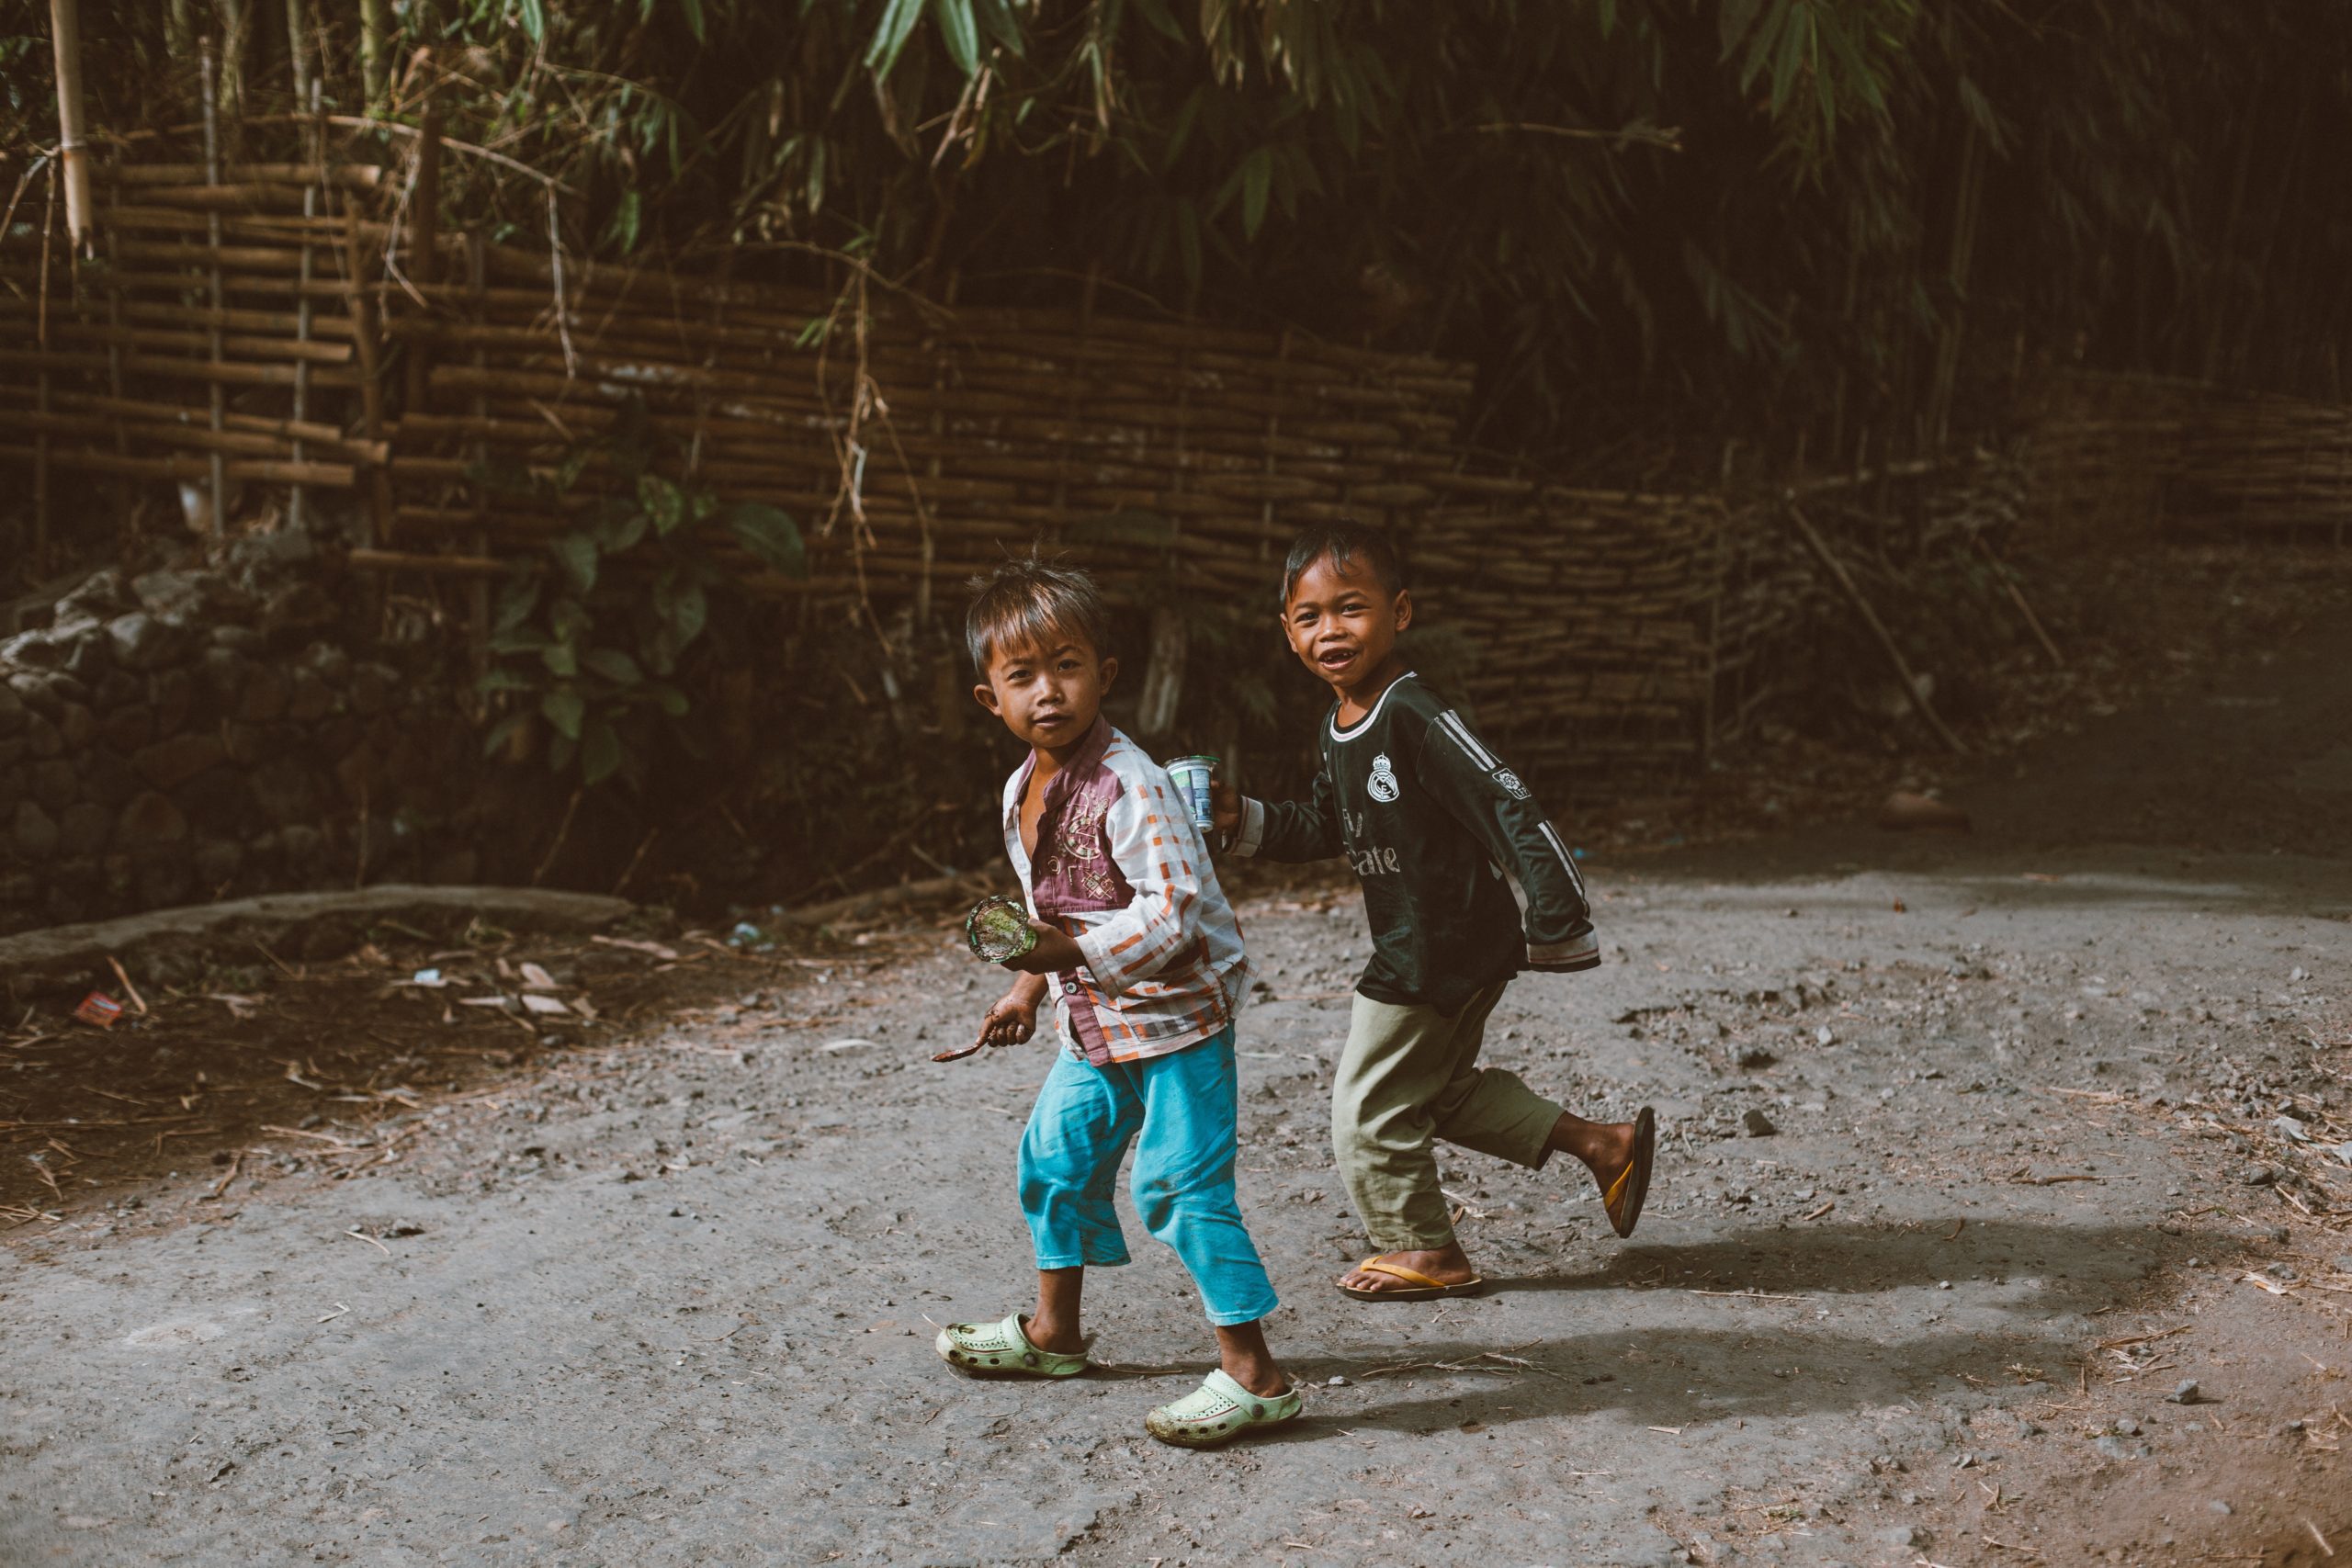 two young boys running in muddy clothes, smiling at the camera.